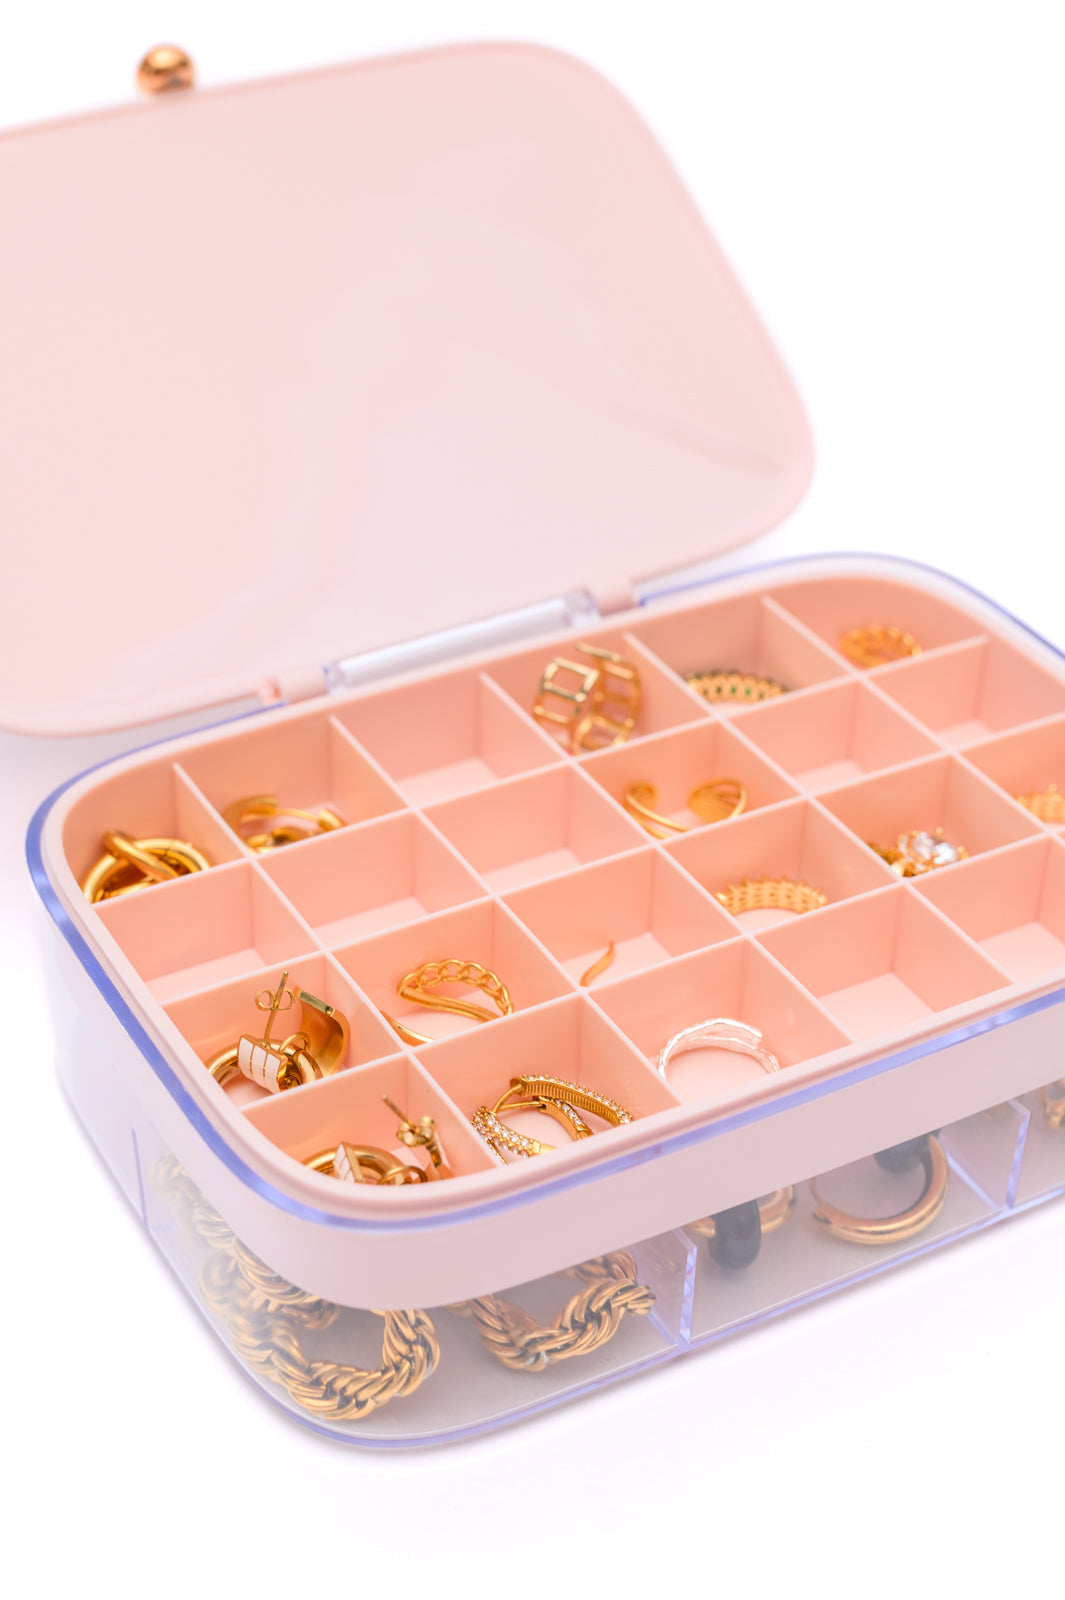 Womens - All Sorted Out Jewelry Storage Case In Pink